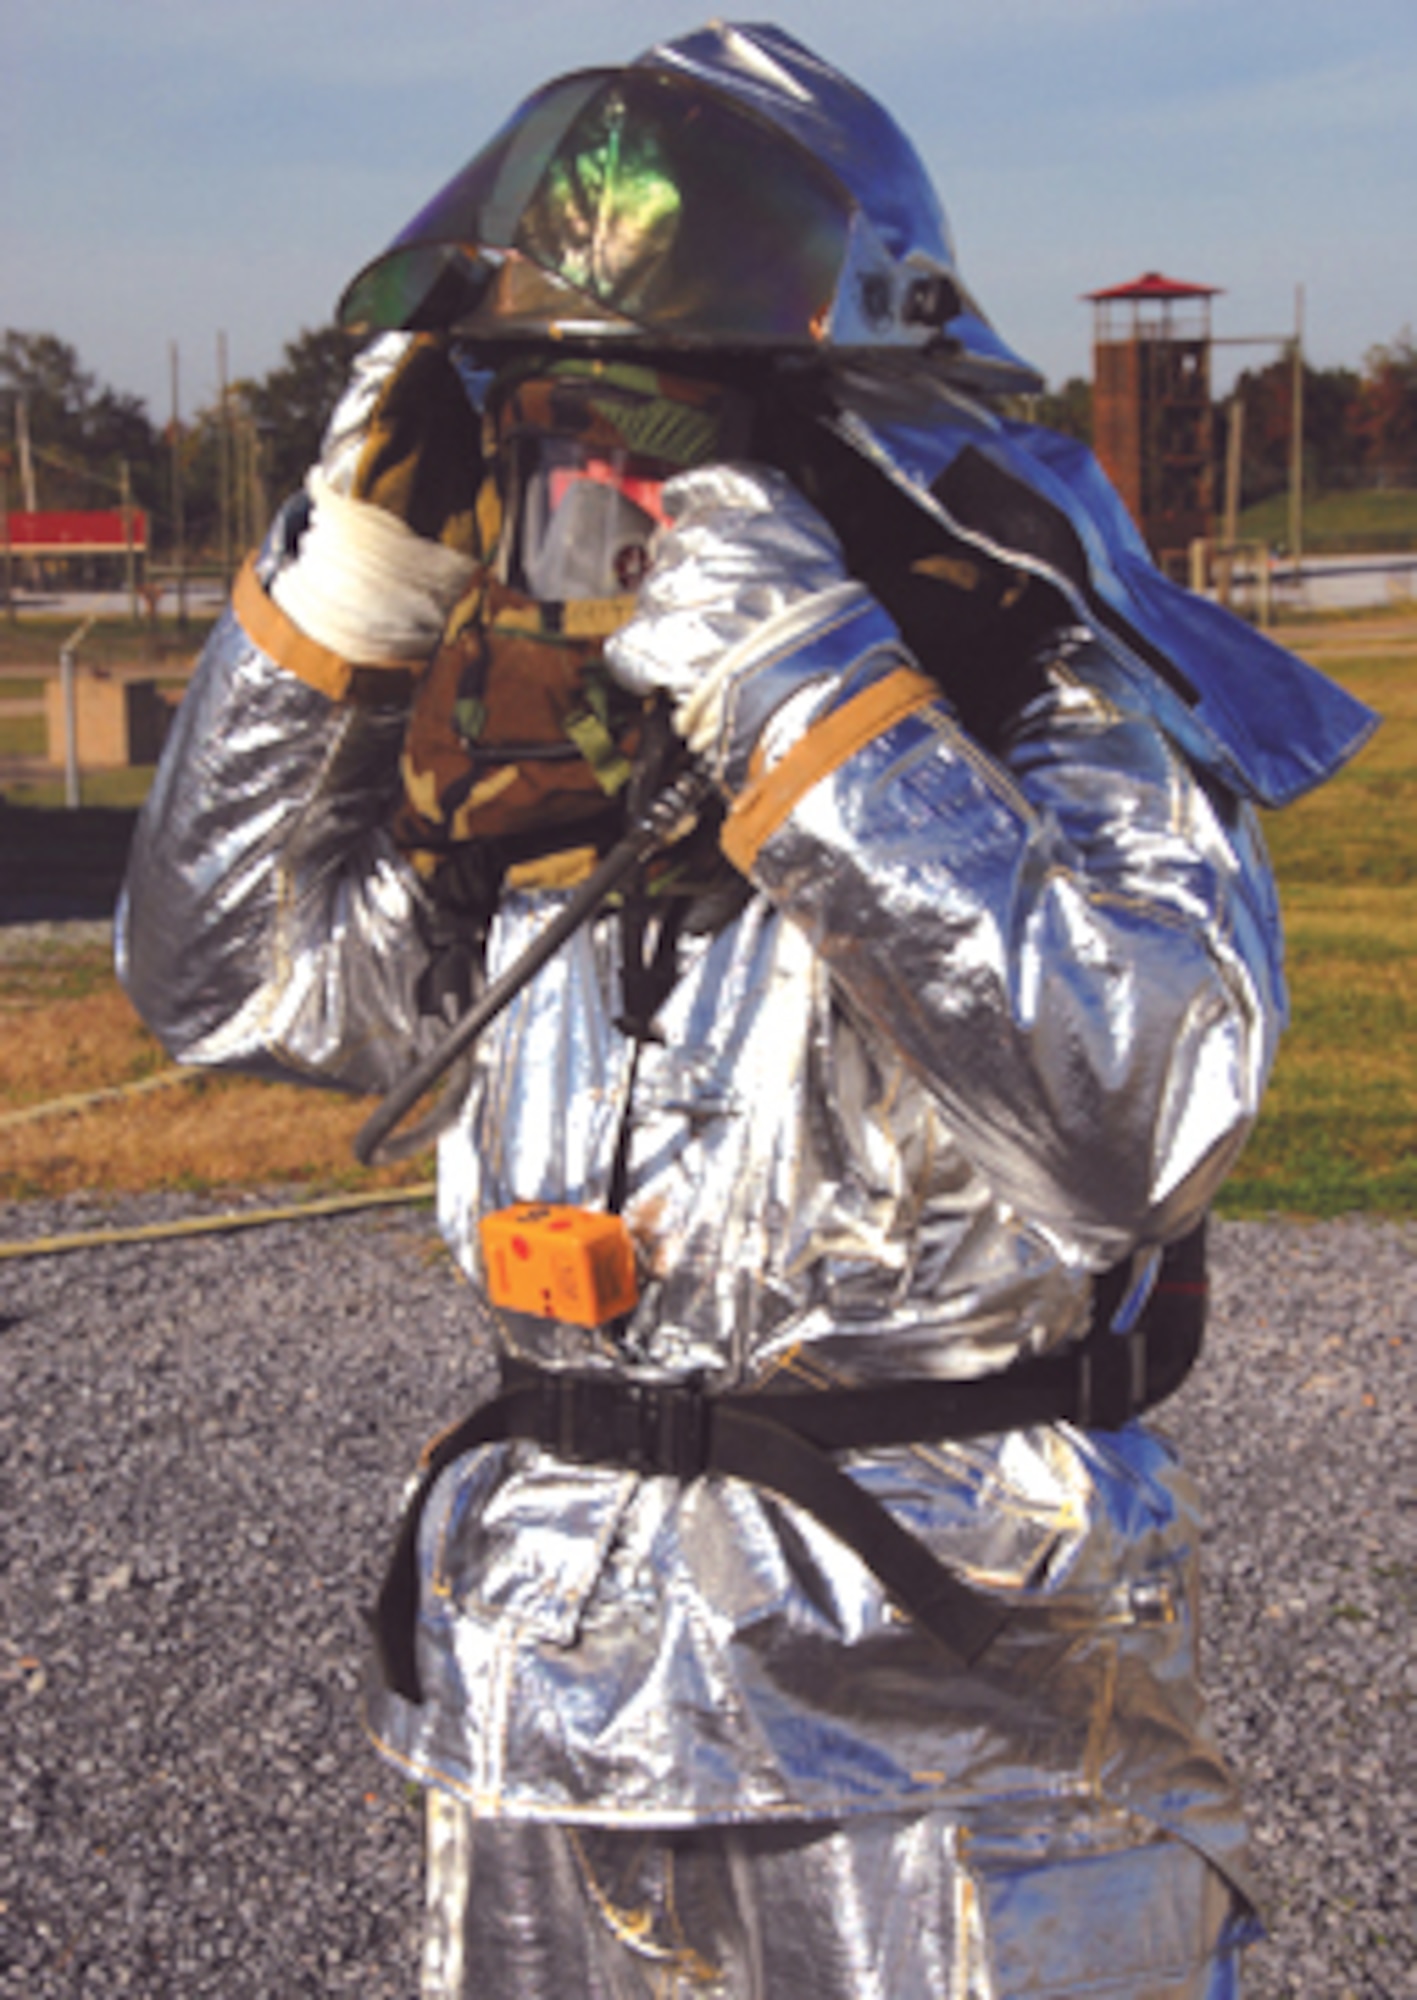 Tech. Sgt. Christopher Foley of the 908th Airlift Wing Civil Engineering Squadron prepares for a structural fire exercise in a chemical environment. The civil engineer squadron Reservists, who bring their civilian firefighting skills to the wing, endure not only the usual protective suit, but MOPP 4 gear as well when working in a chemical environment.